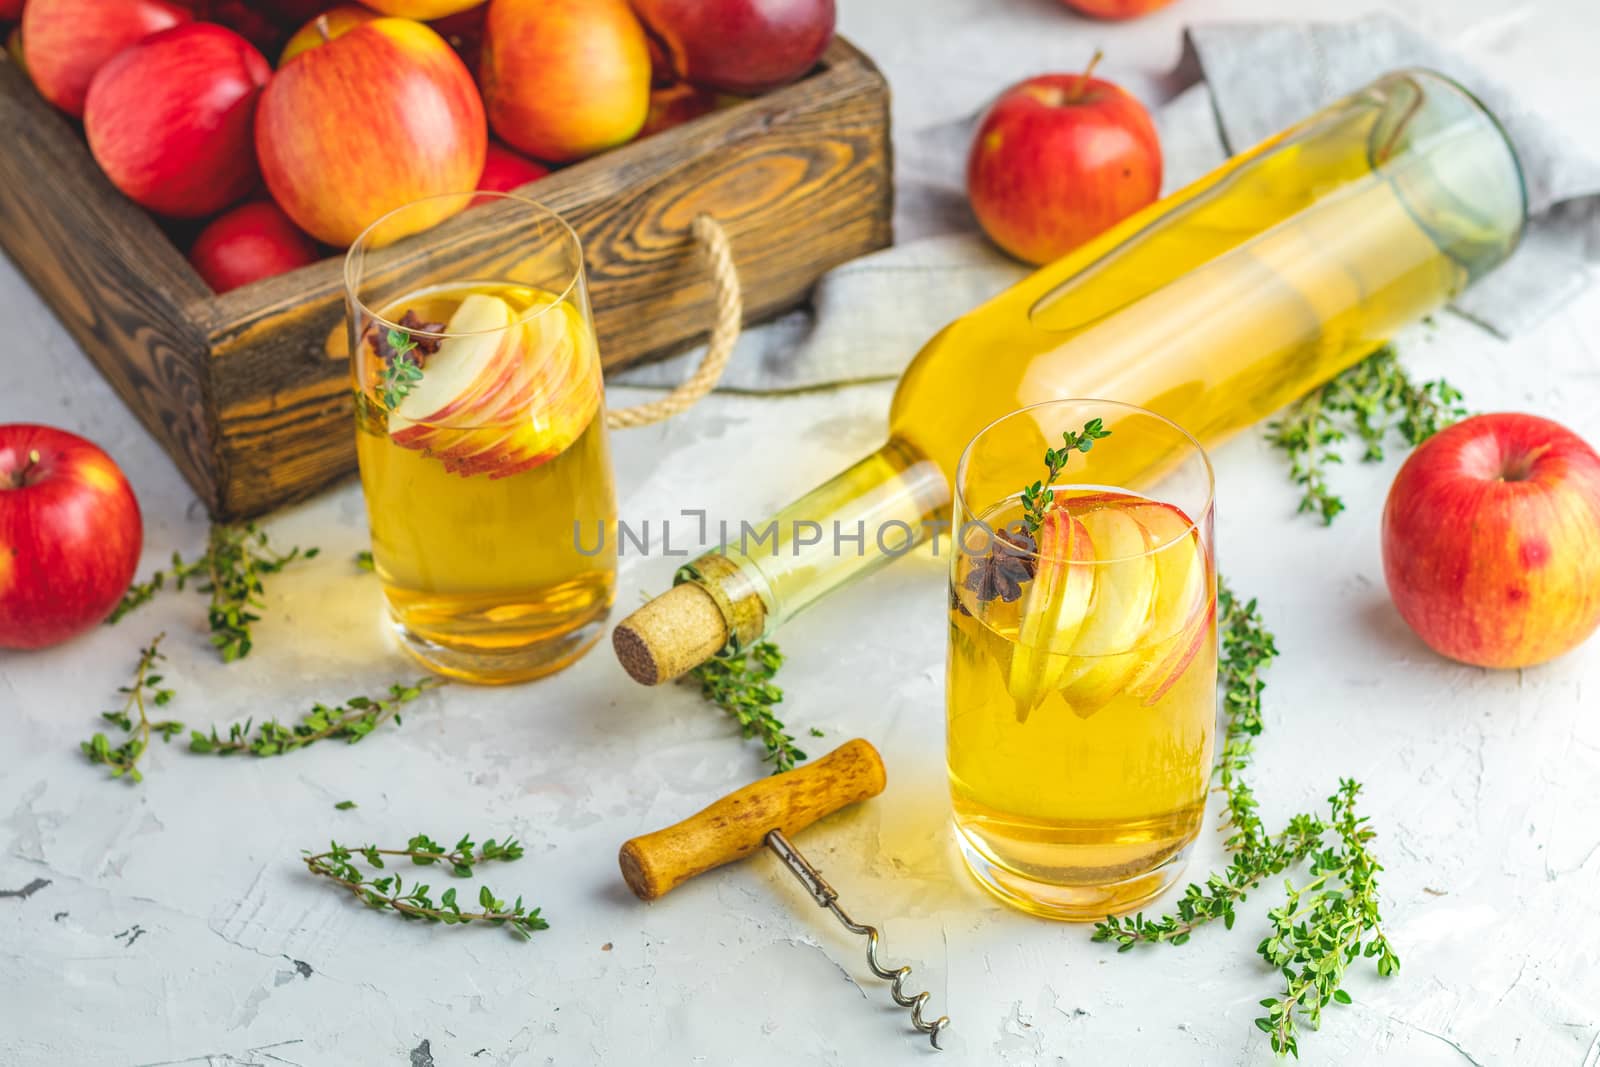 Hard apple cider cocktail with fall fresh thyme and star anise. Bottle and glasses of homemade organic apple cider with fresh apples in box, light concrete table surface. Shallow depth of the field.